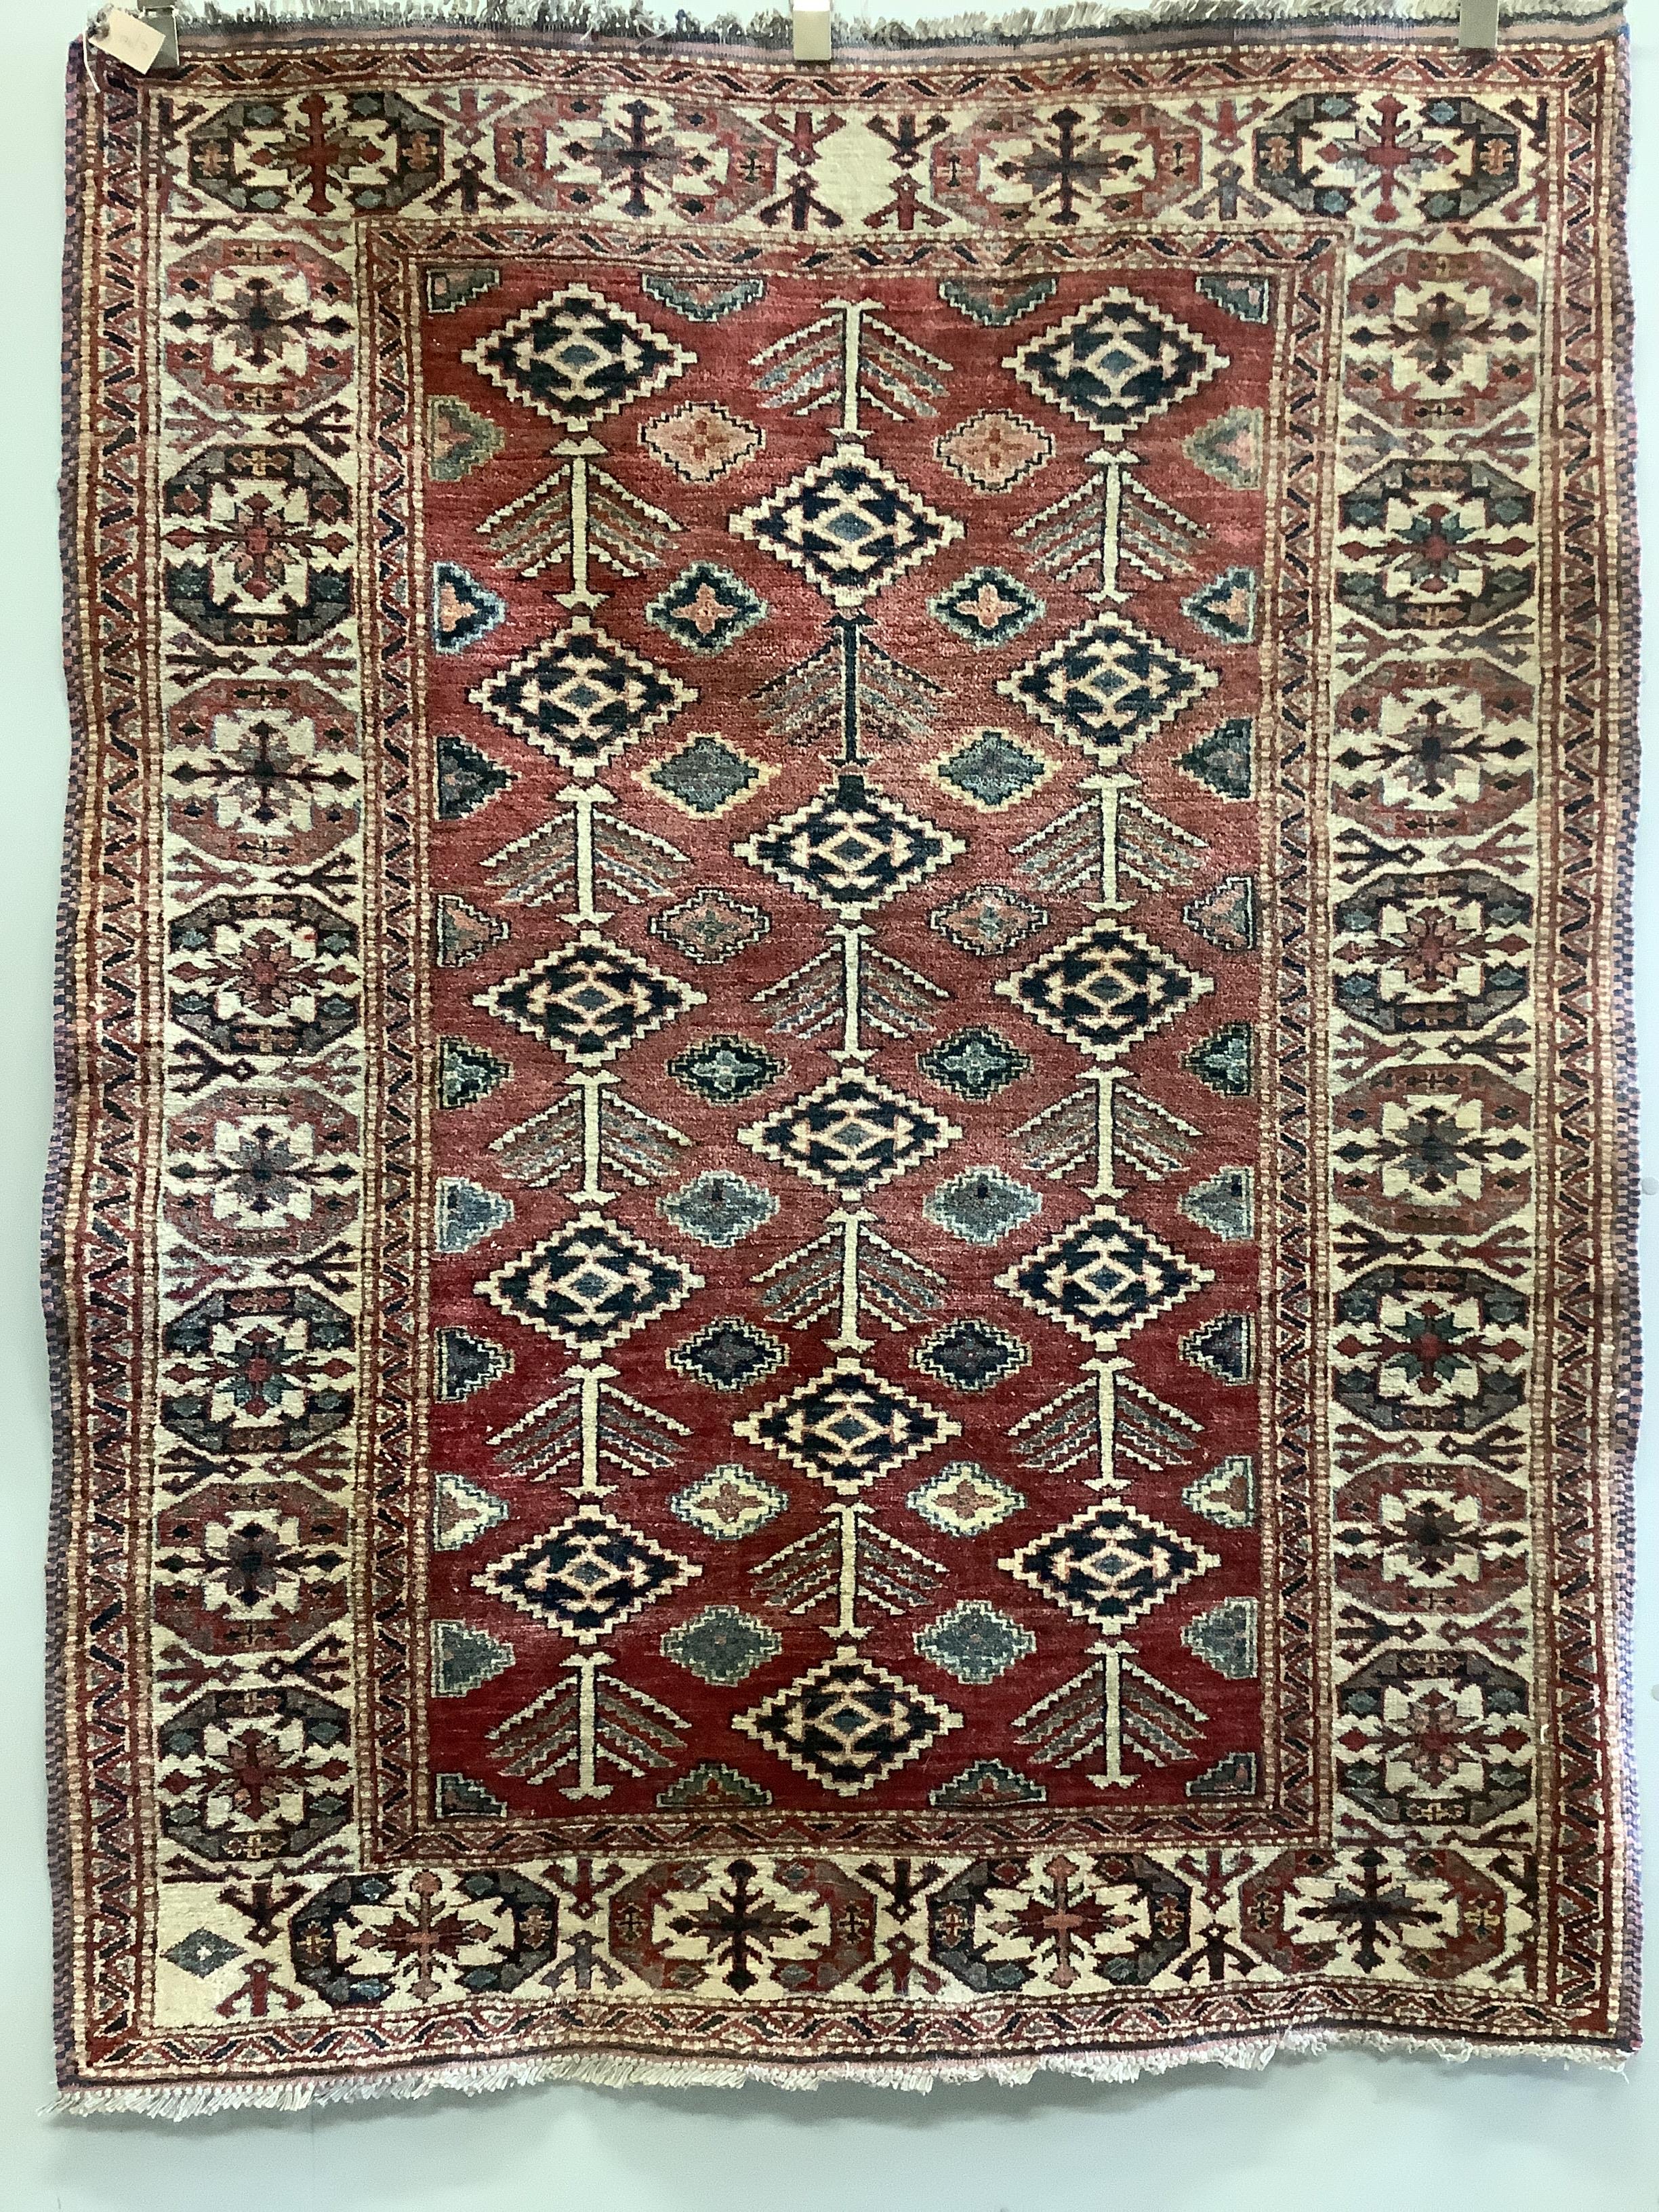 A Caucasian style red ground rug, 170 x 143cm